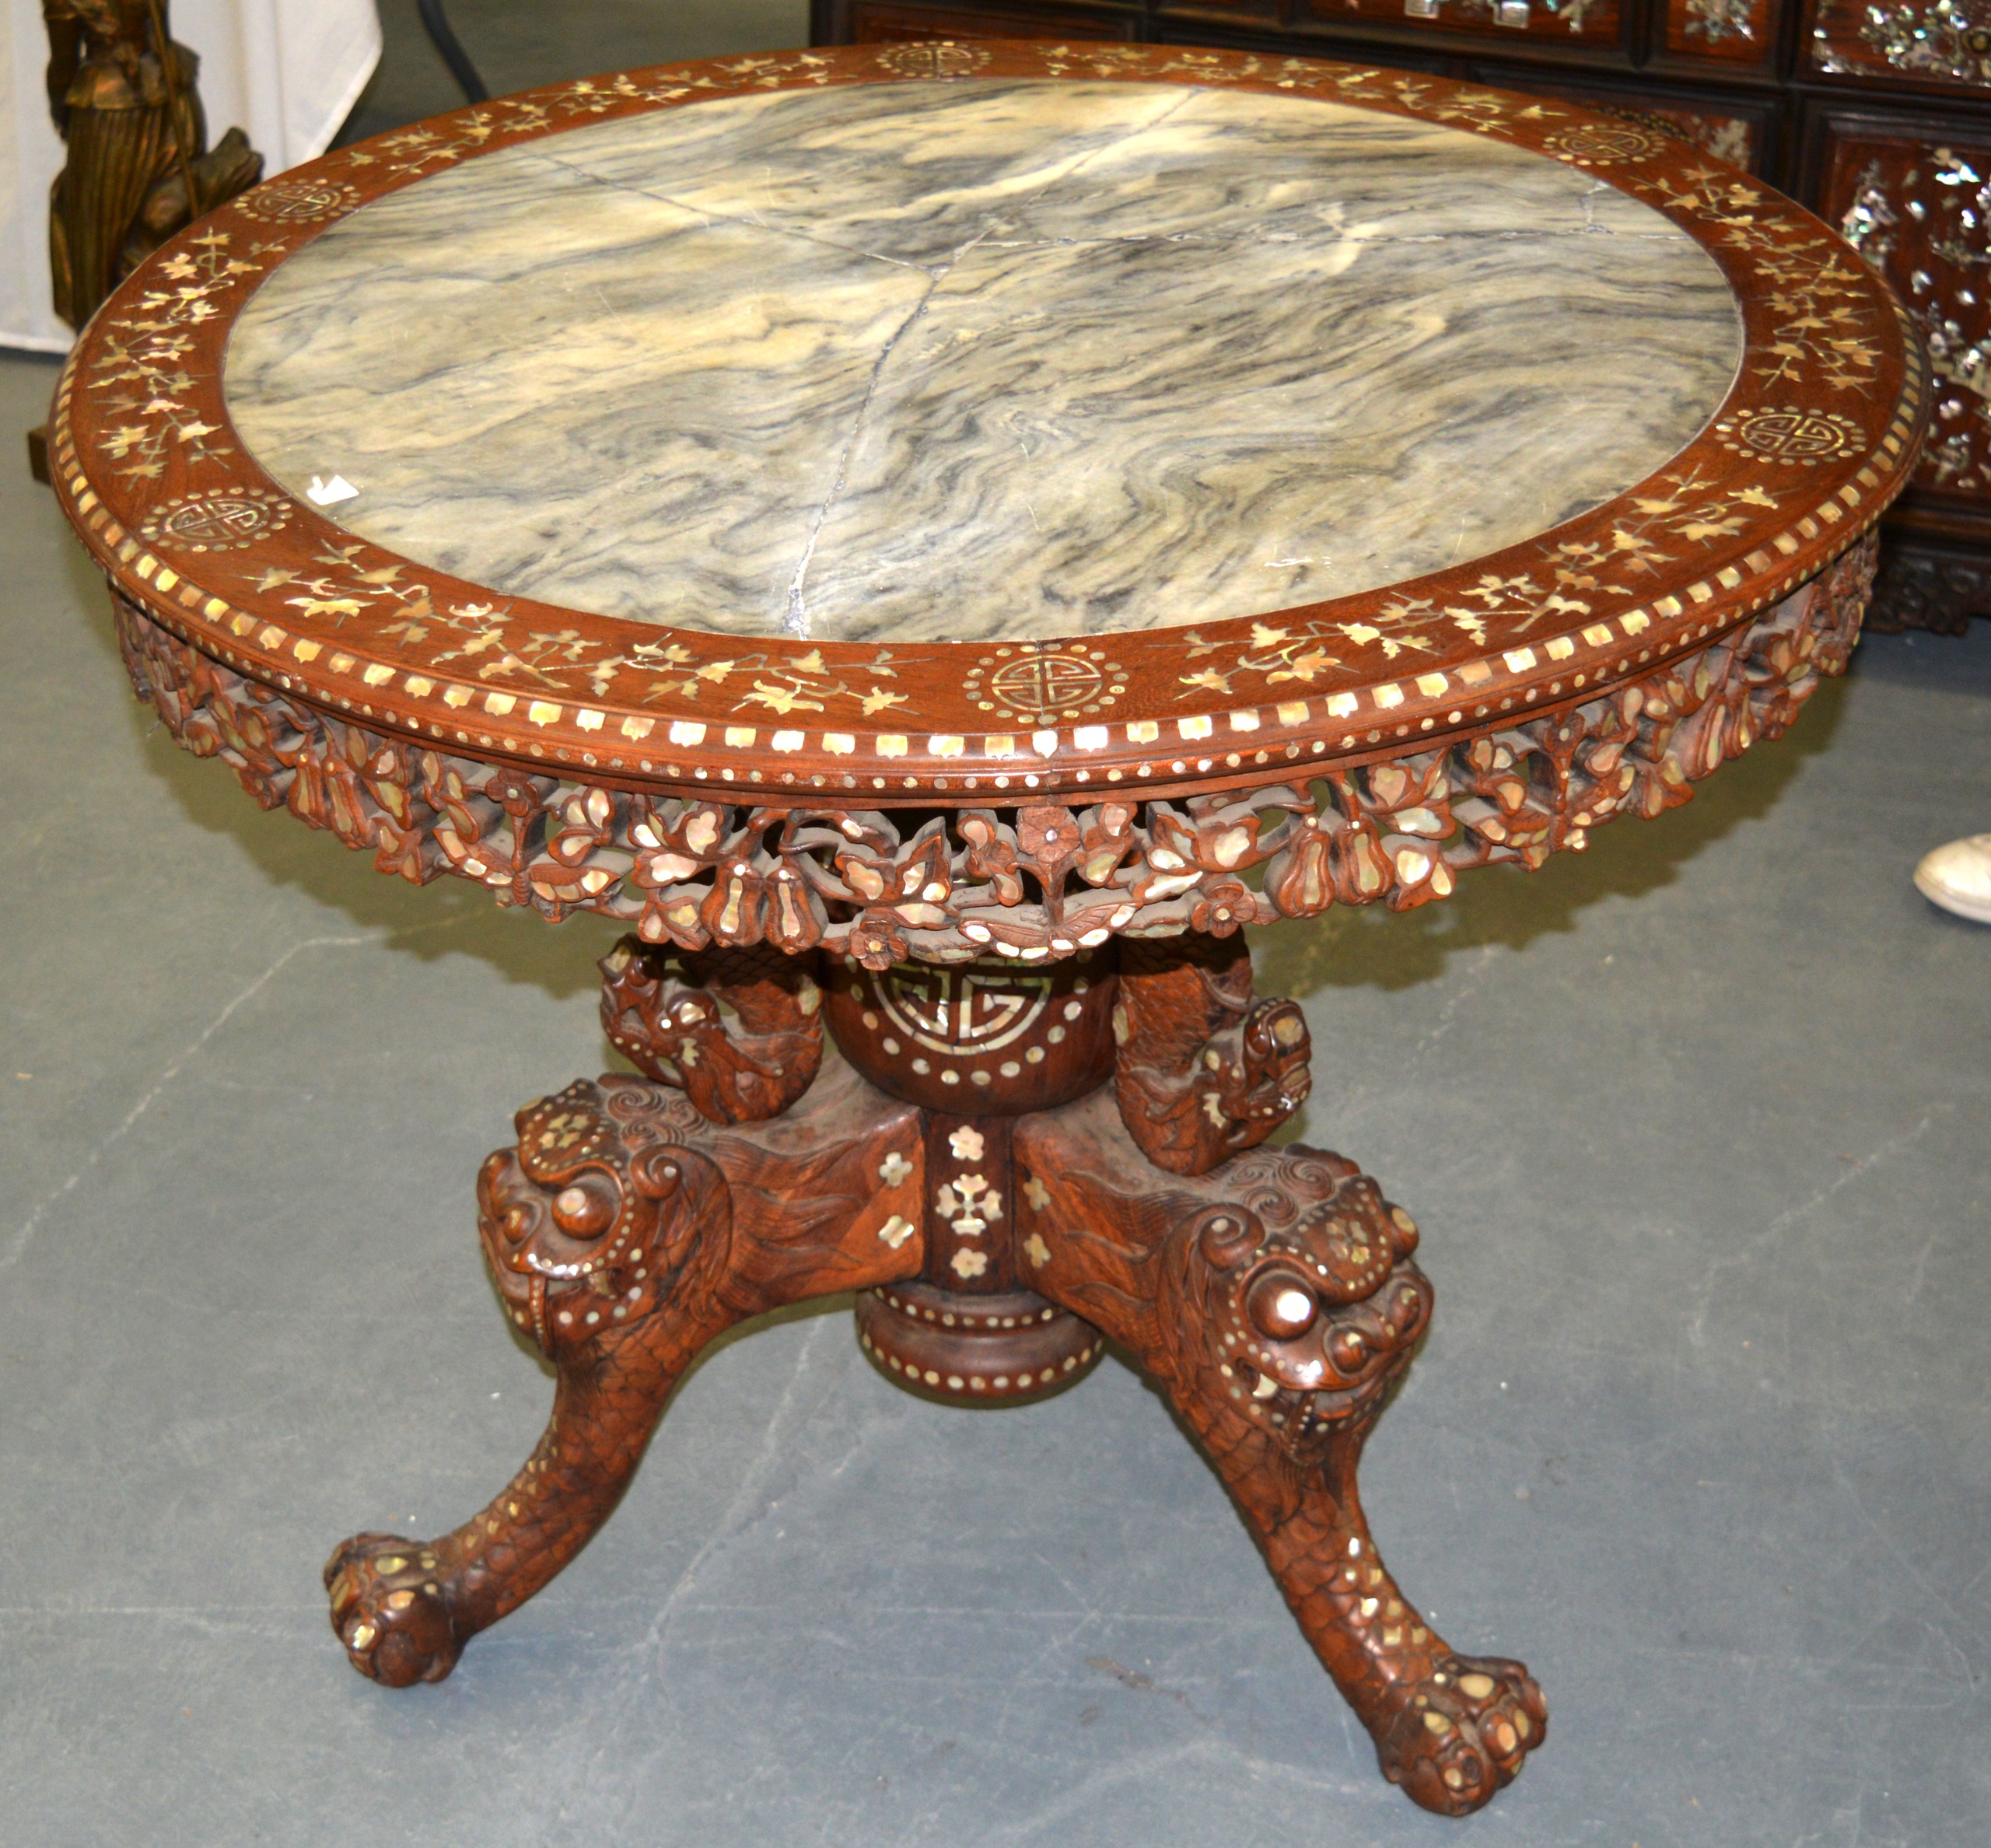 A GOOD LATE 19TH CENTURY CHINESE MOTHER OF PEARL MARBLE INSET BREAKFAST TABLE with carved floral